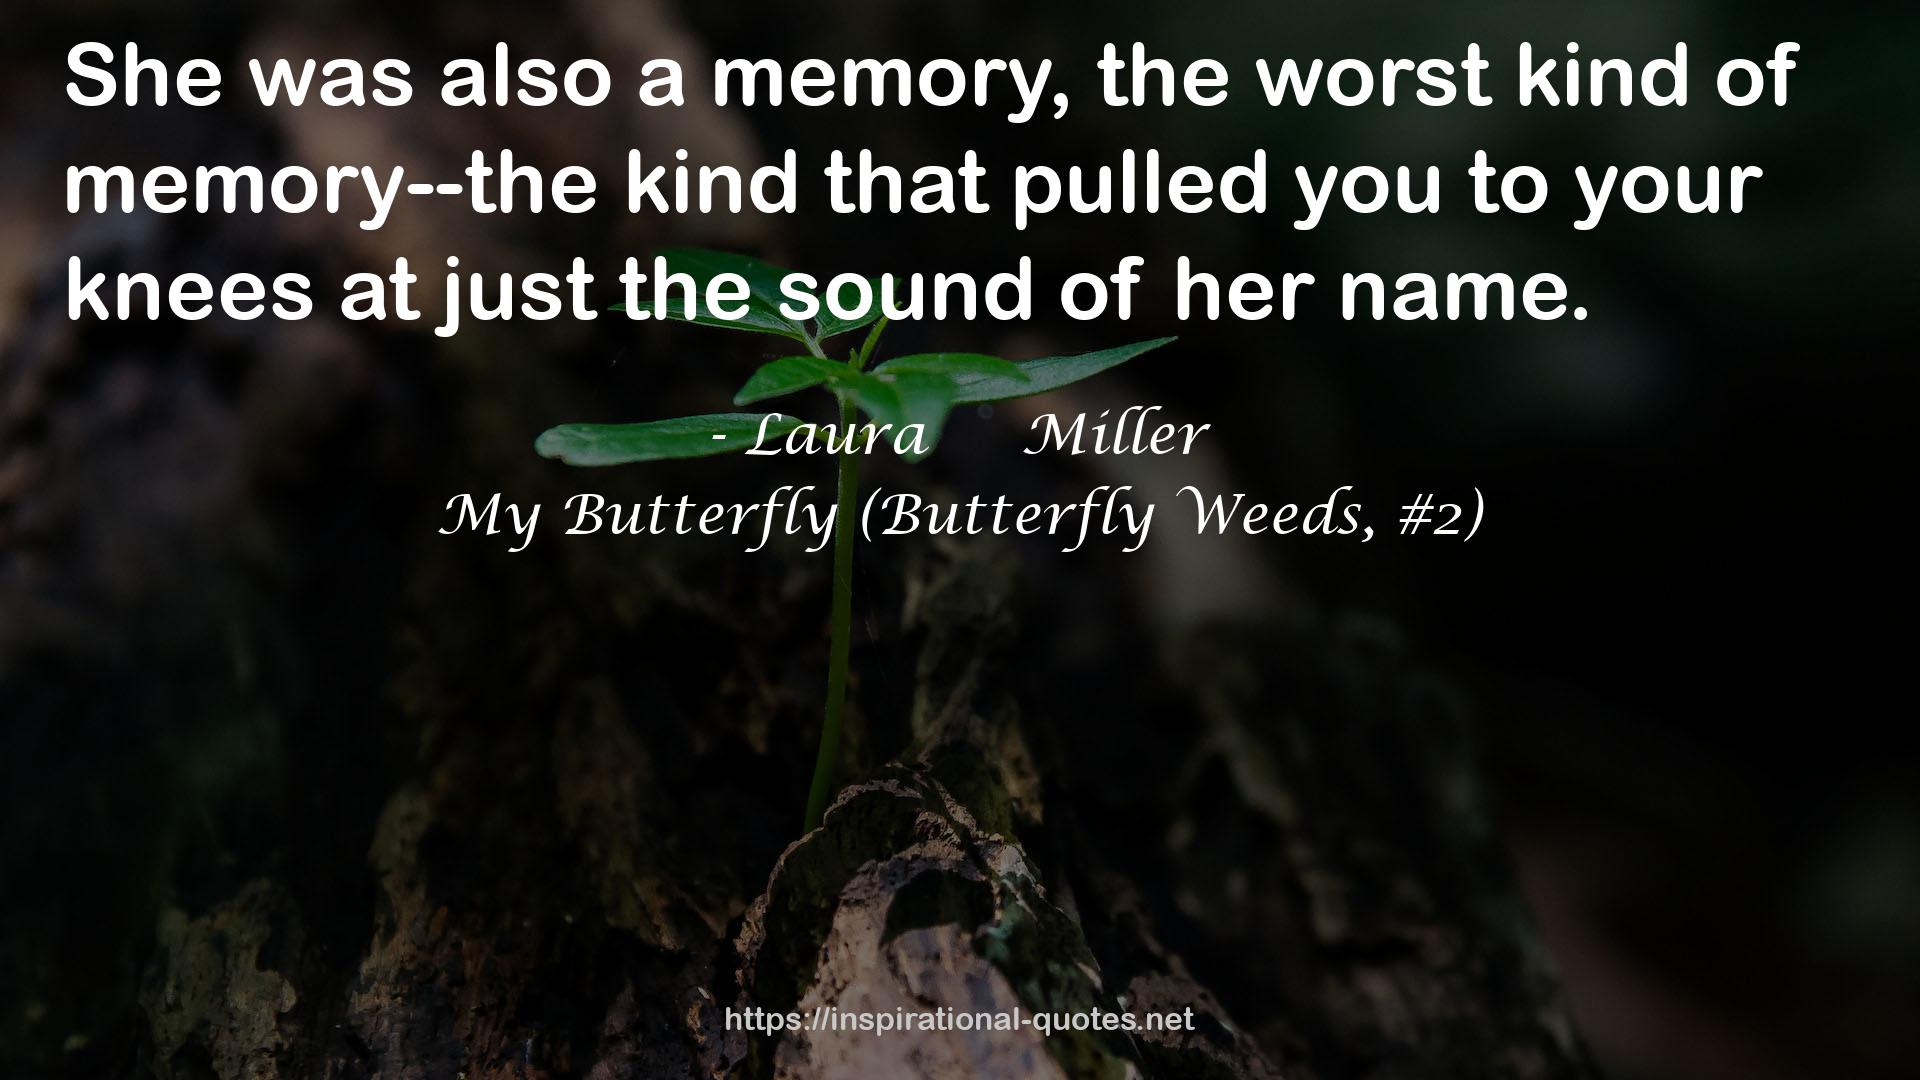 My Butterfly (Butterfly Weeds, #2) QUOTES